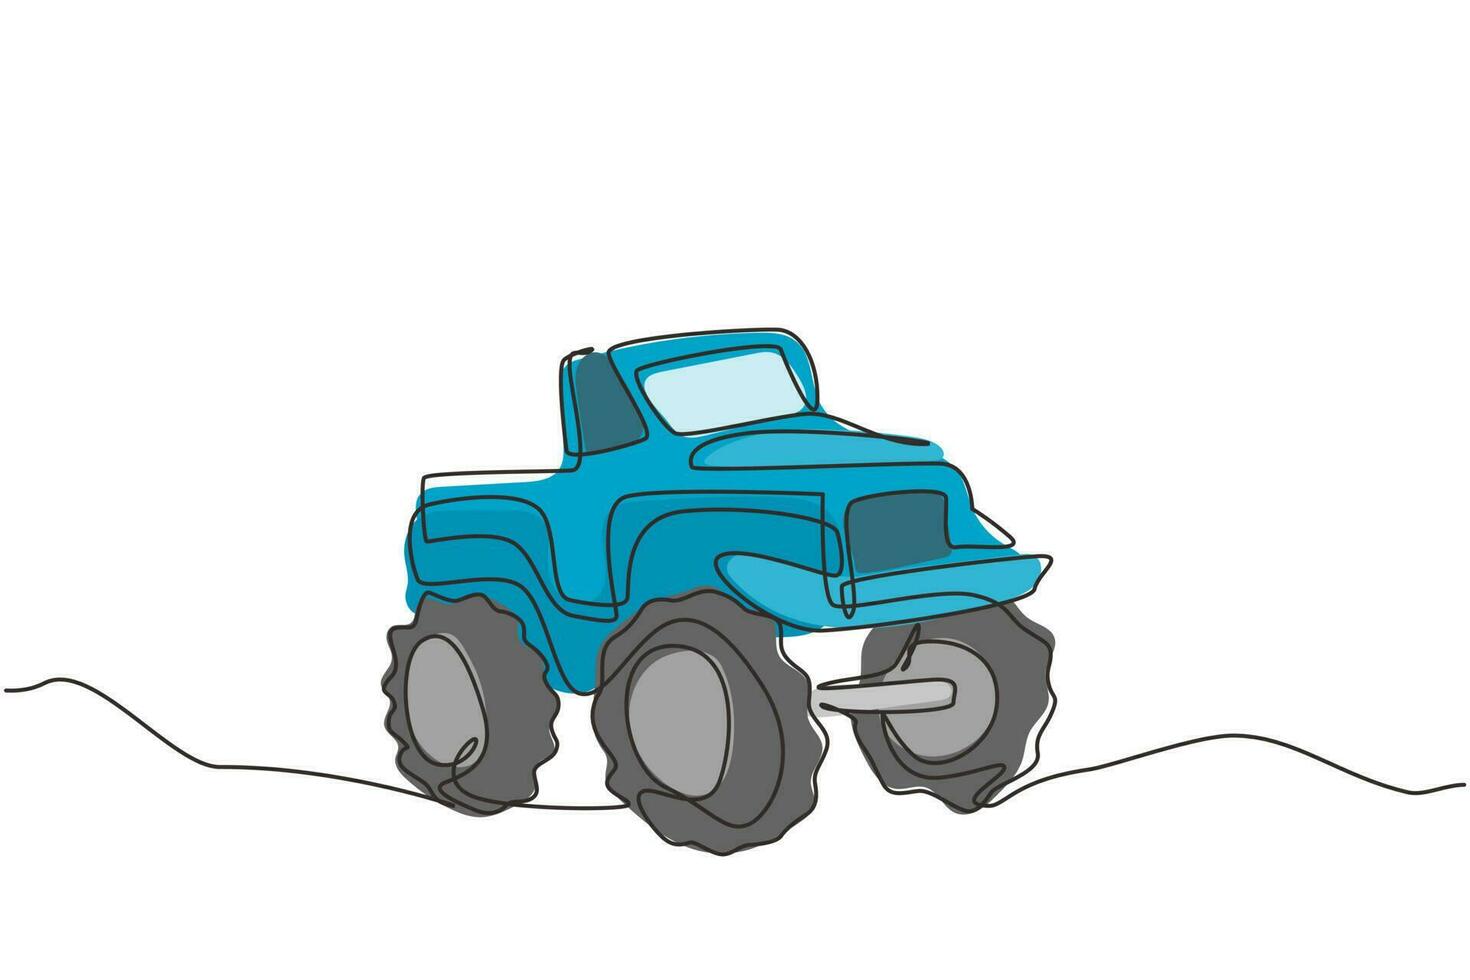 Single continuous line drawing big monster truck. Cartoon funny style. Side view. Extreme automobile. Auto in flat design. Childrens toy monster truck. One line draw graphic design vector illustration